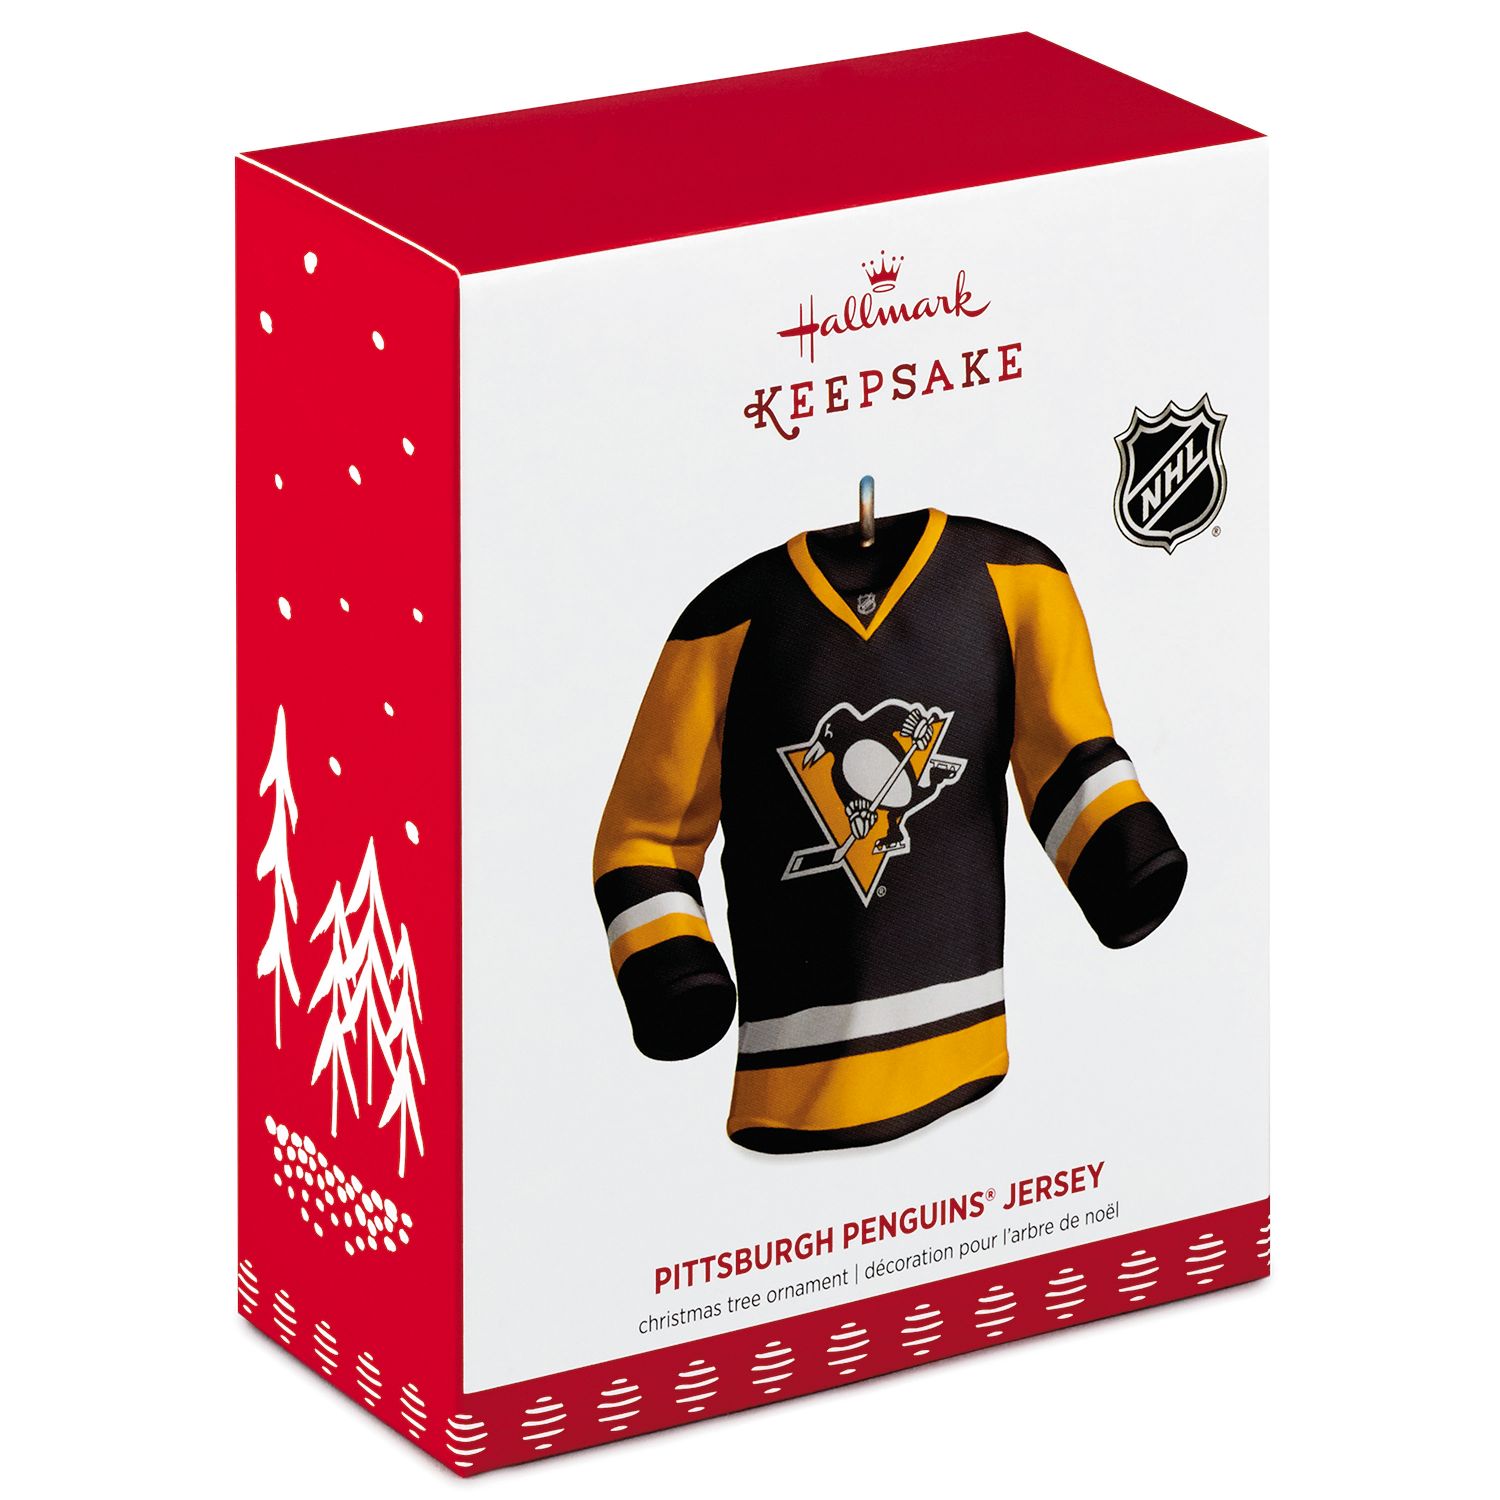 penguins 50 years jersey